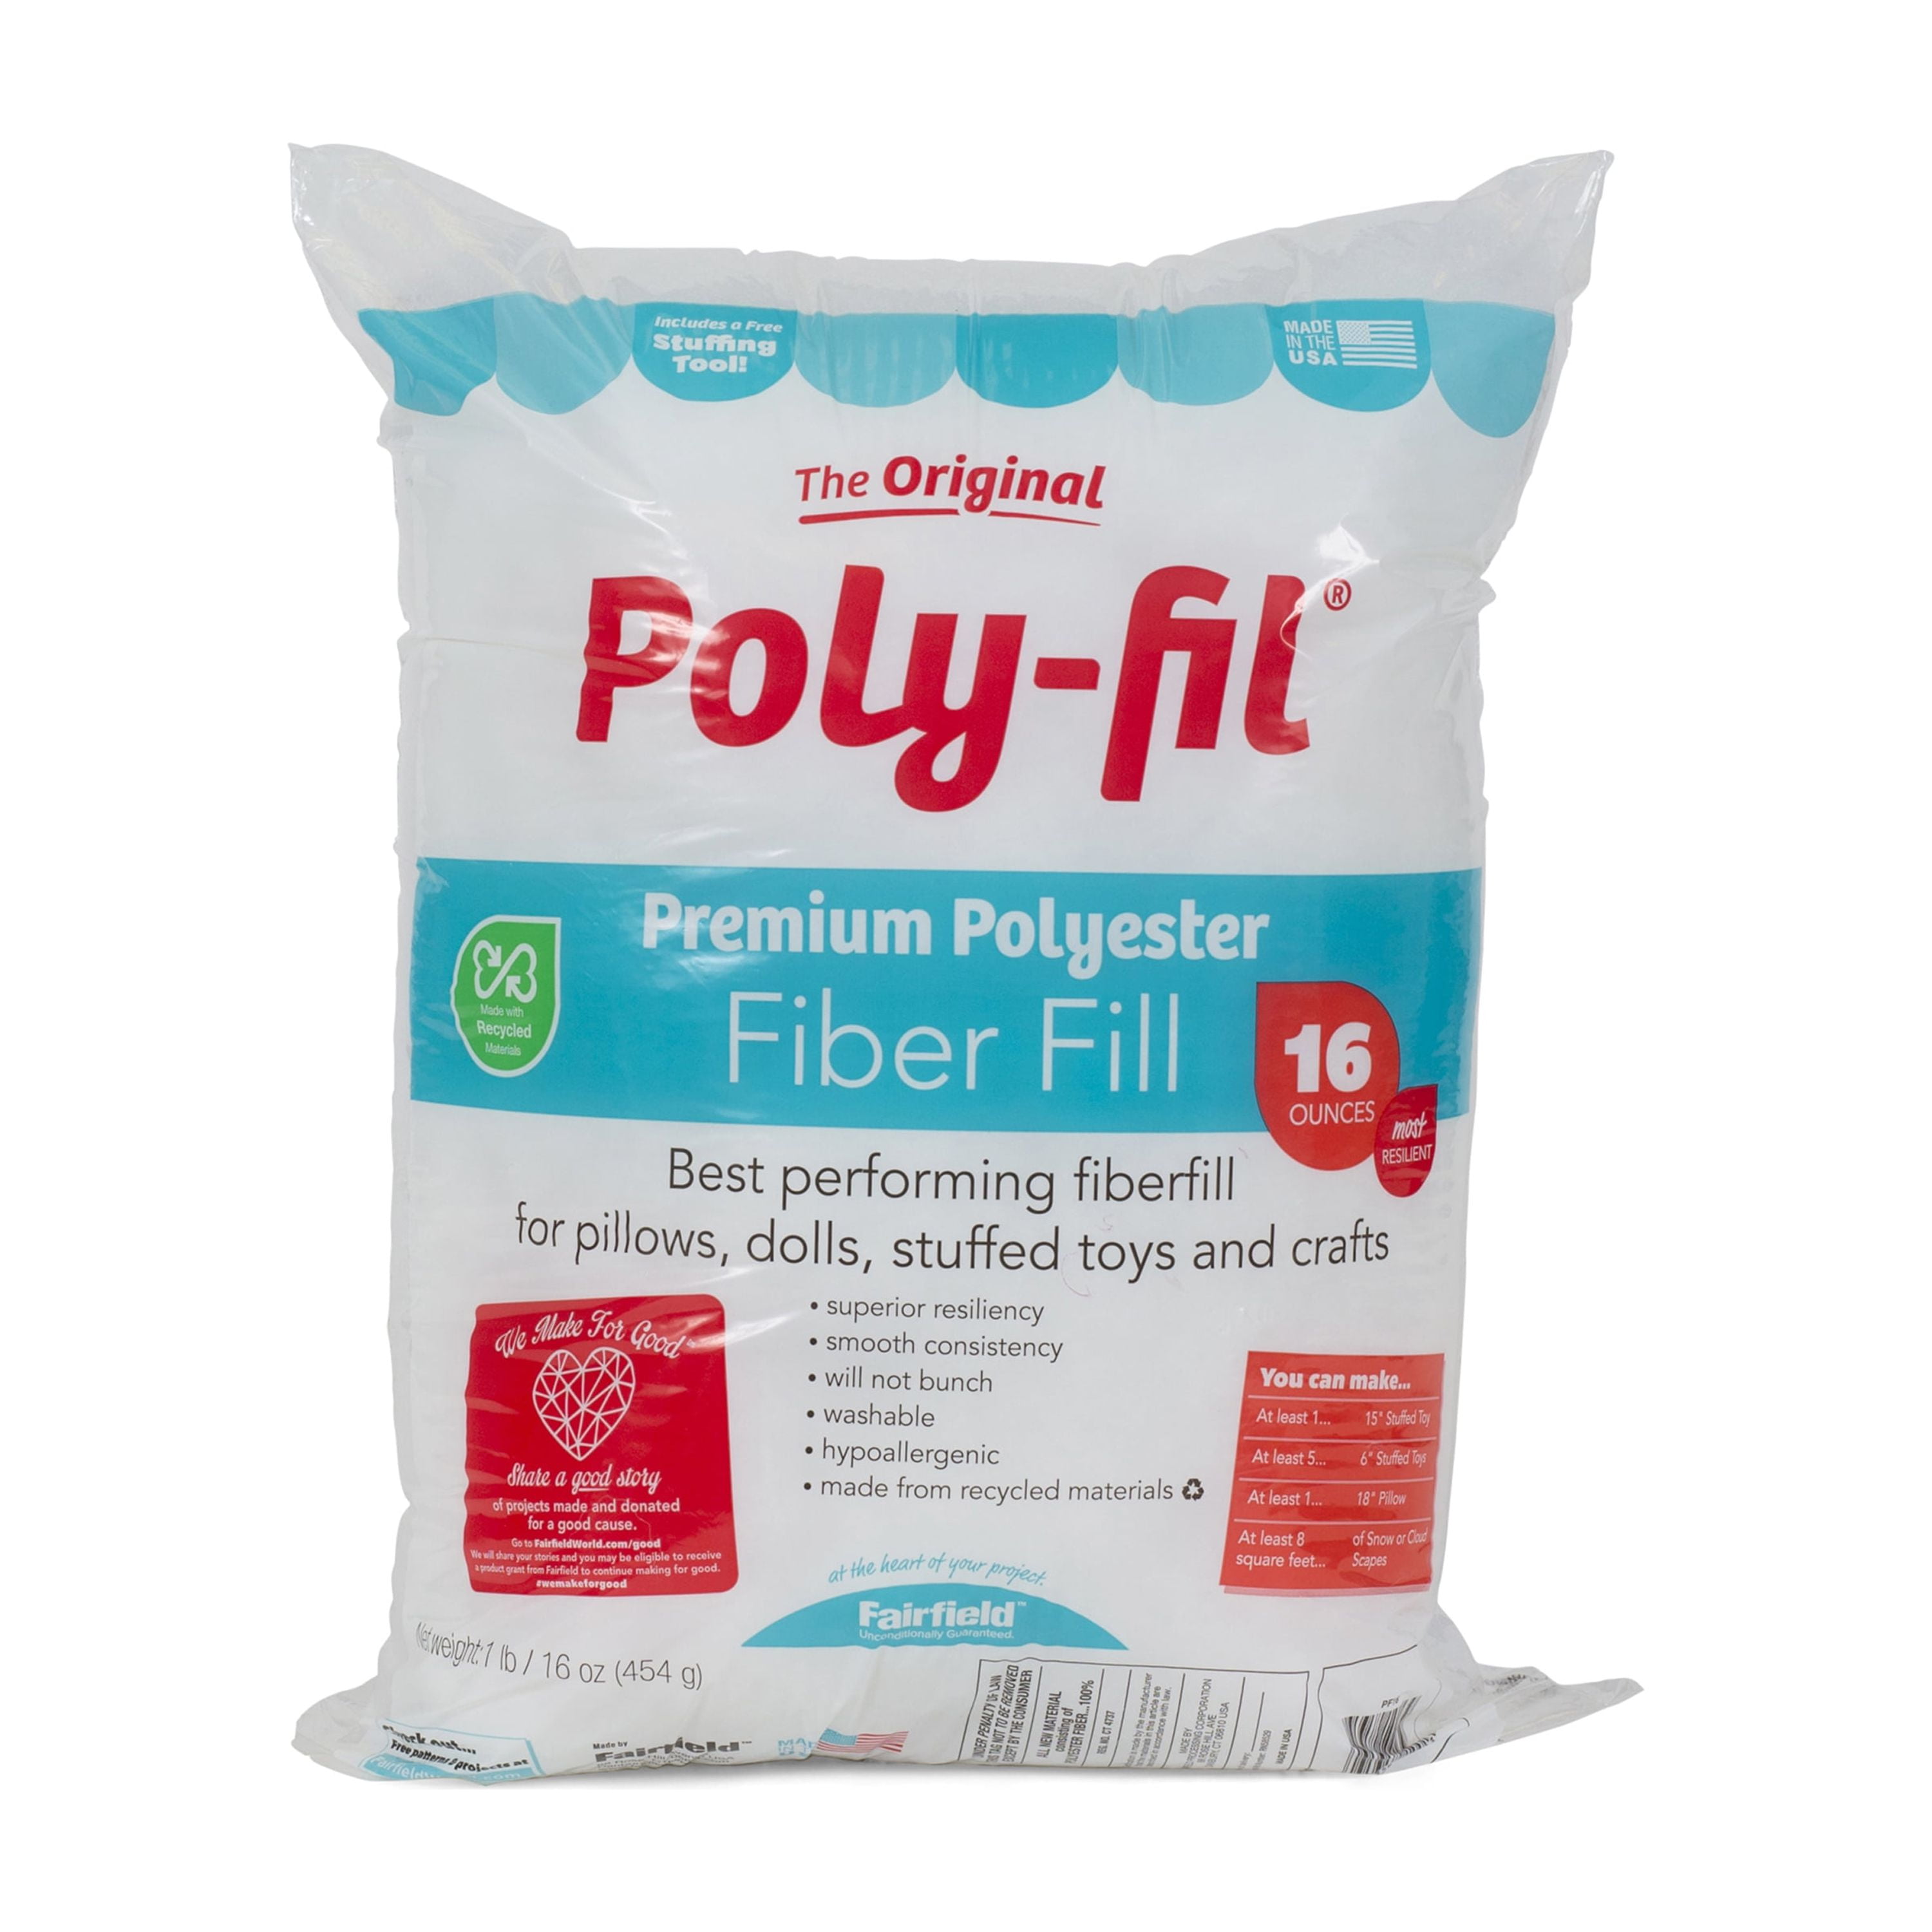 Essentials by Leisure Arts Polyester Fiber-Fil, Premium Fiber-Fil Stuffing,  12oz Bag, High Resilience Polyfill for filling Stuffed Animals, Crafts,  Pillow Stuffing, Cushion Stuffing